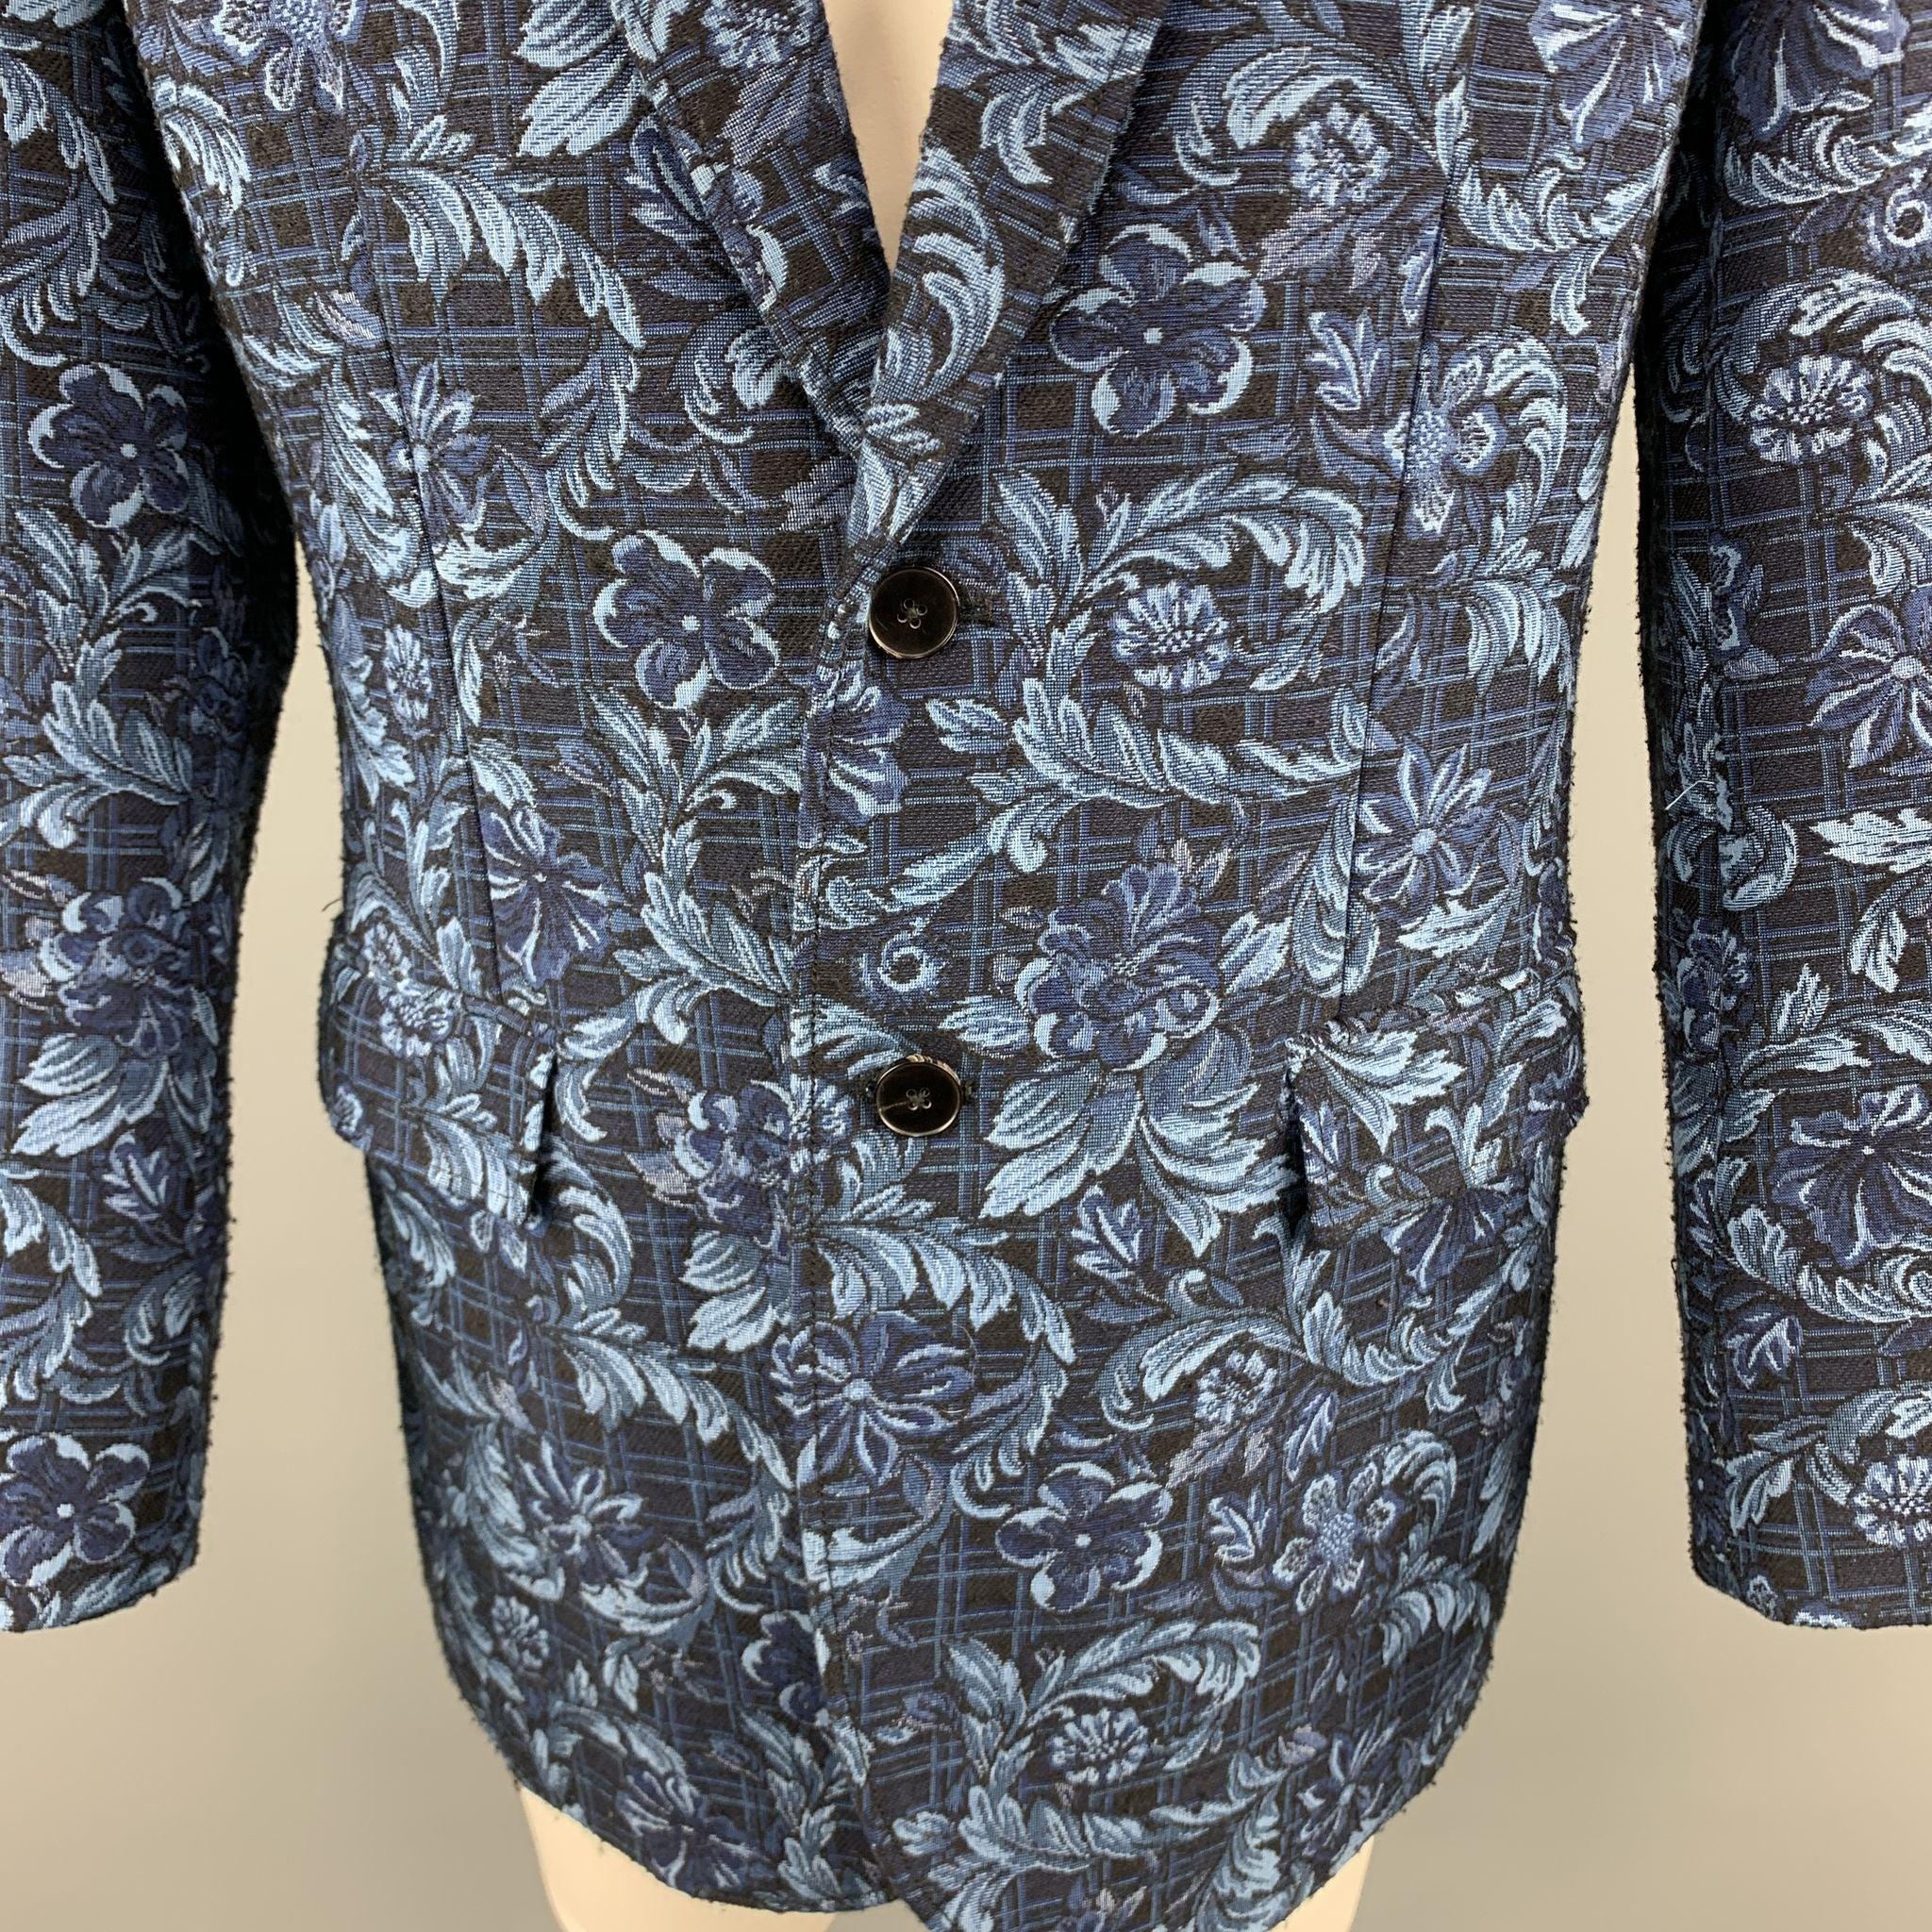 3.1 PHILLIP LIM Size 42 Floral Navy Jacquard Viscose Blend Notch Lapel Coat In Good Condition For Sale In San Francisco, CA